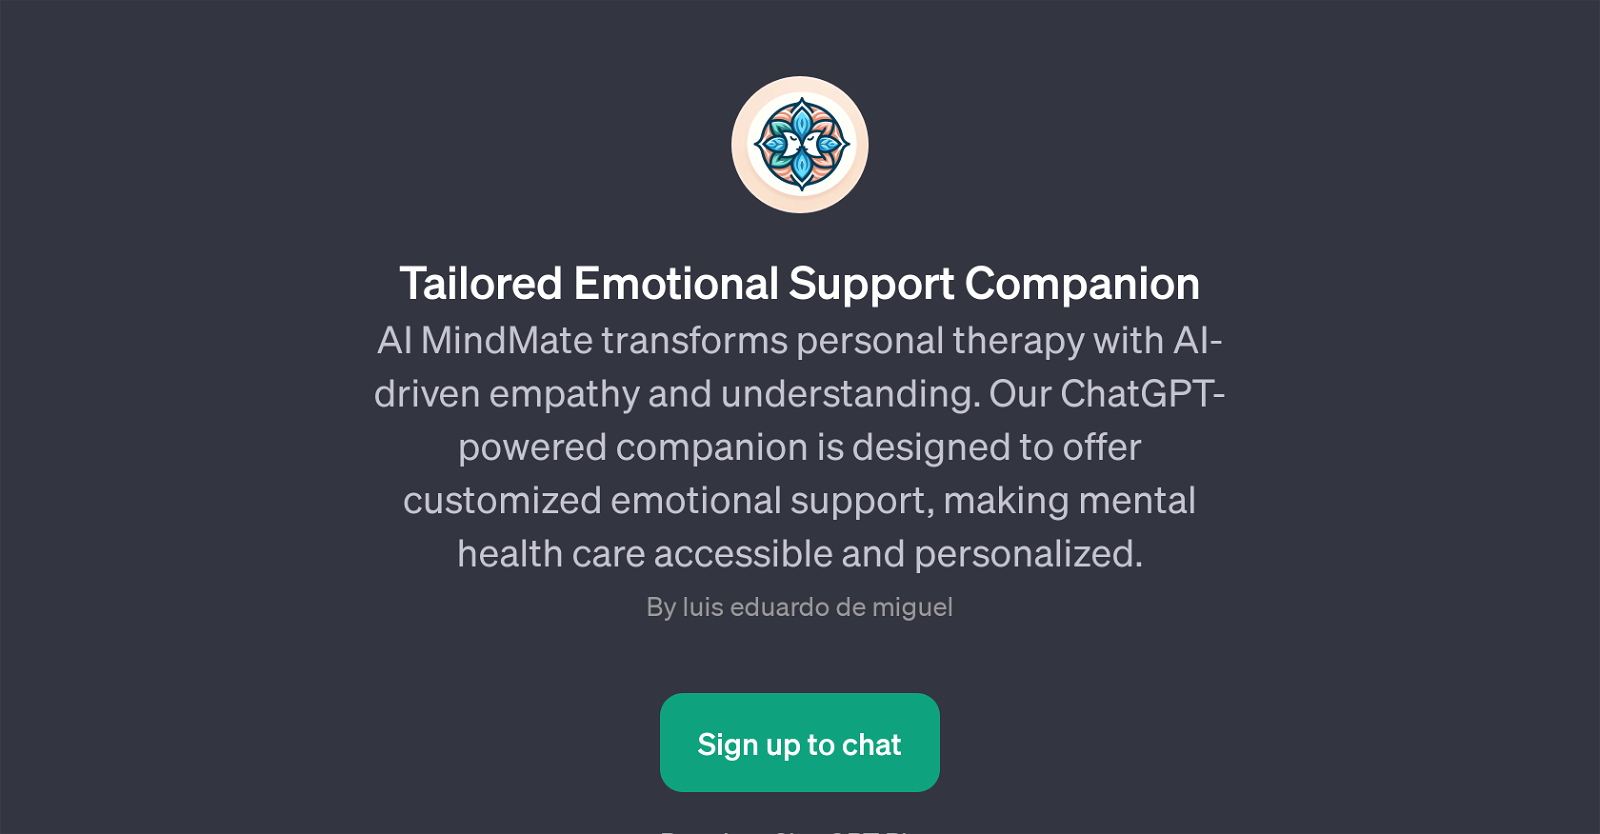 Tailored Emotional Support Companion website